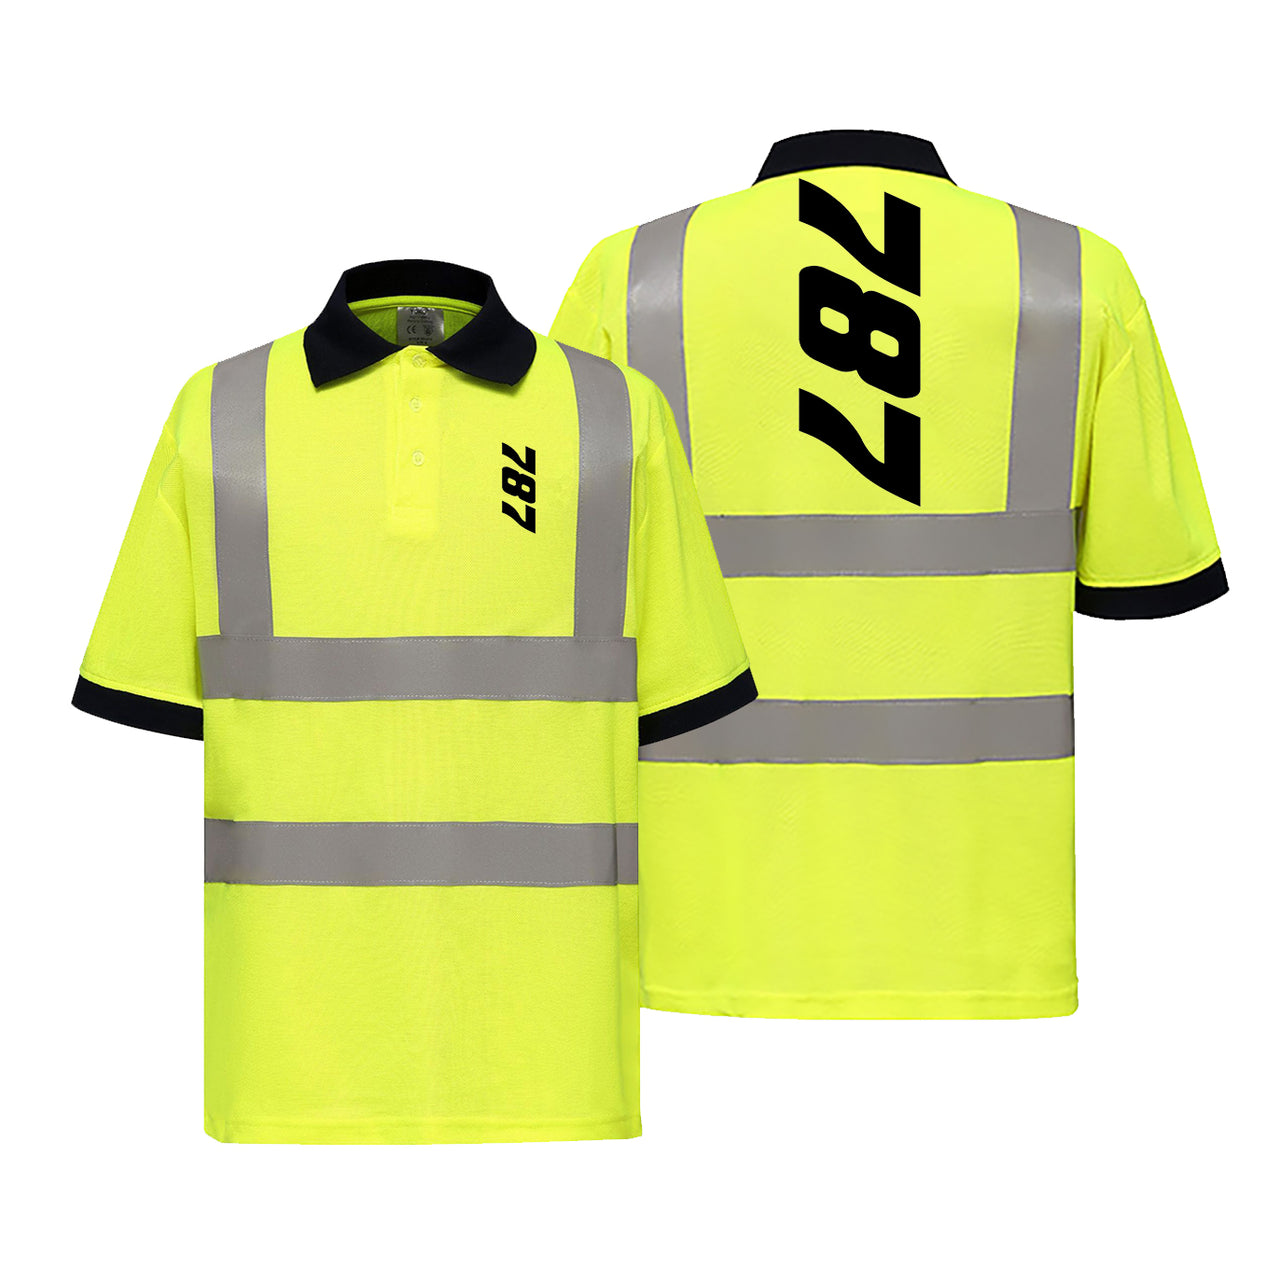 Boeing 787 Text Designed Reflective Polo T-Shirts